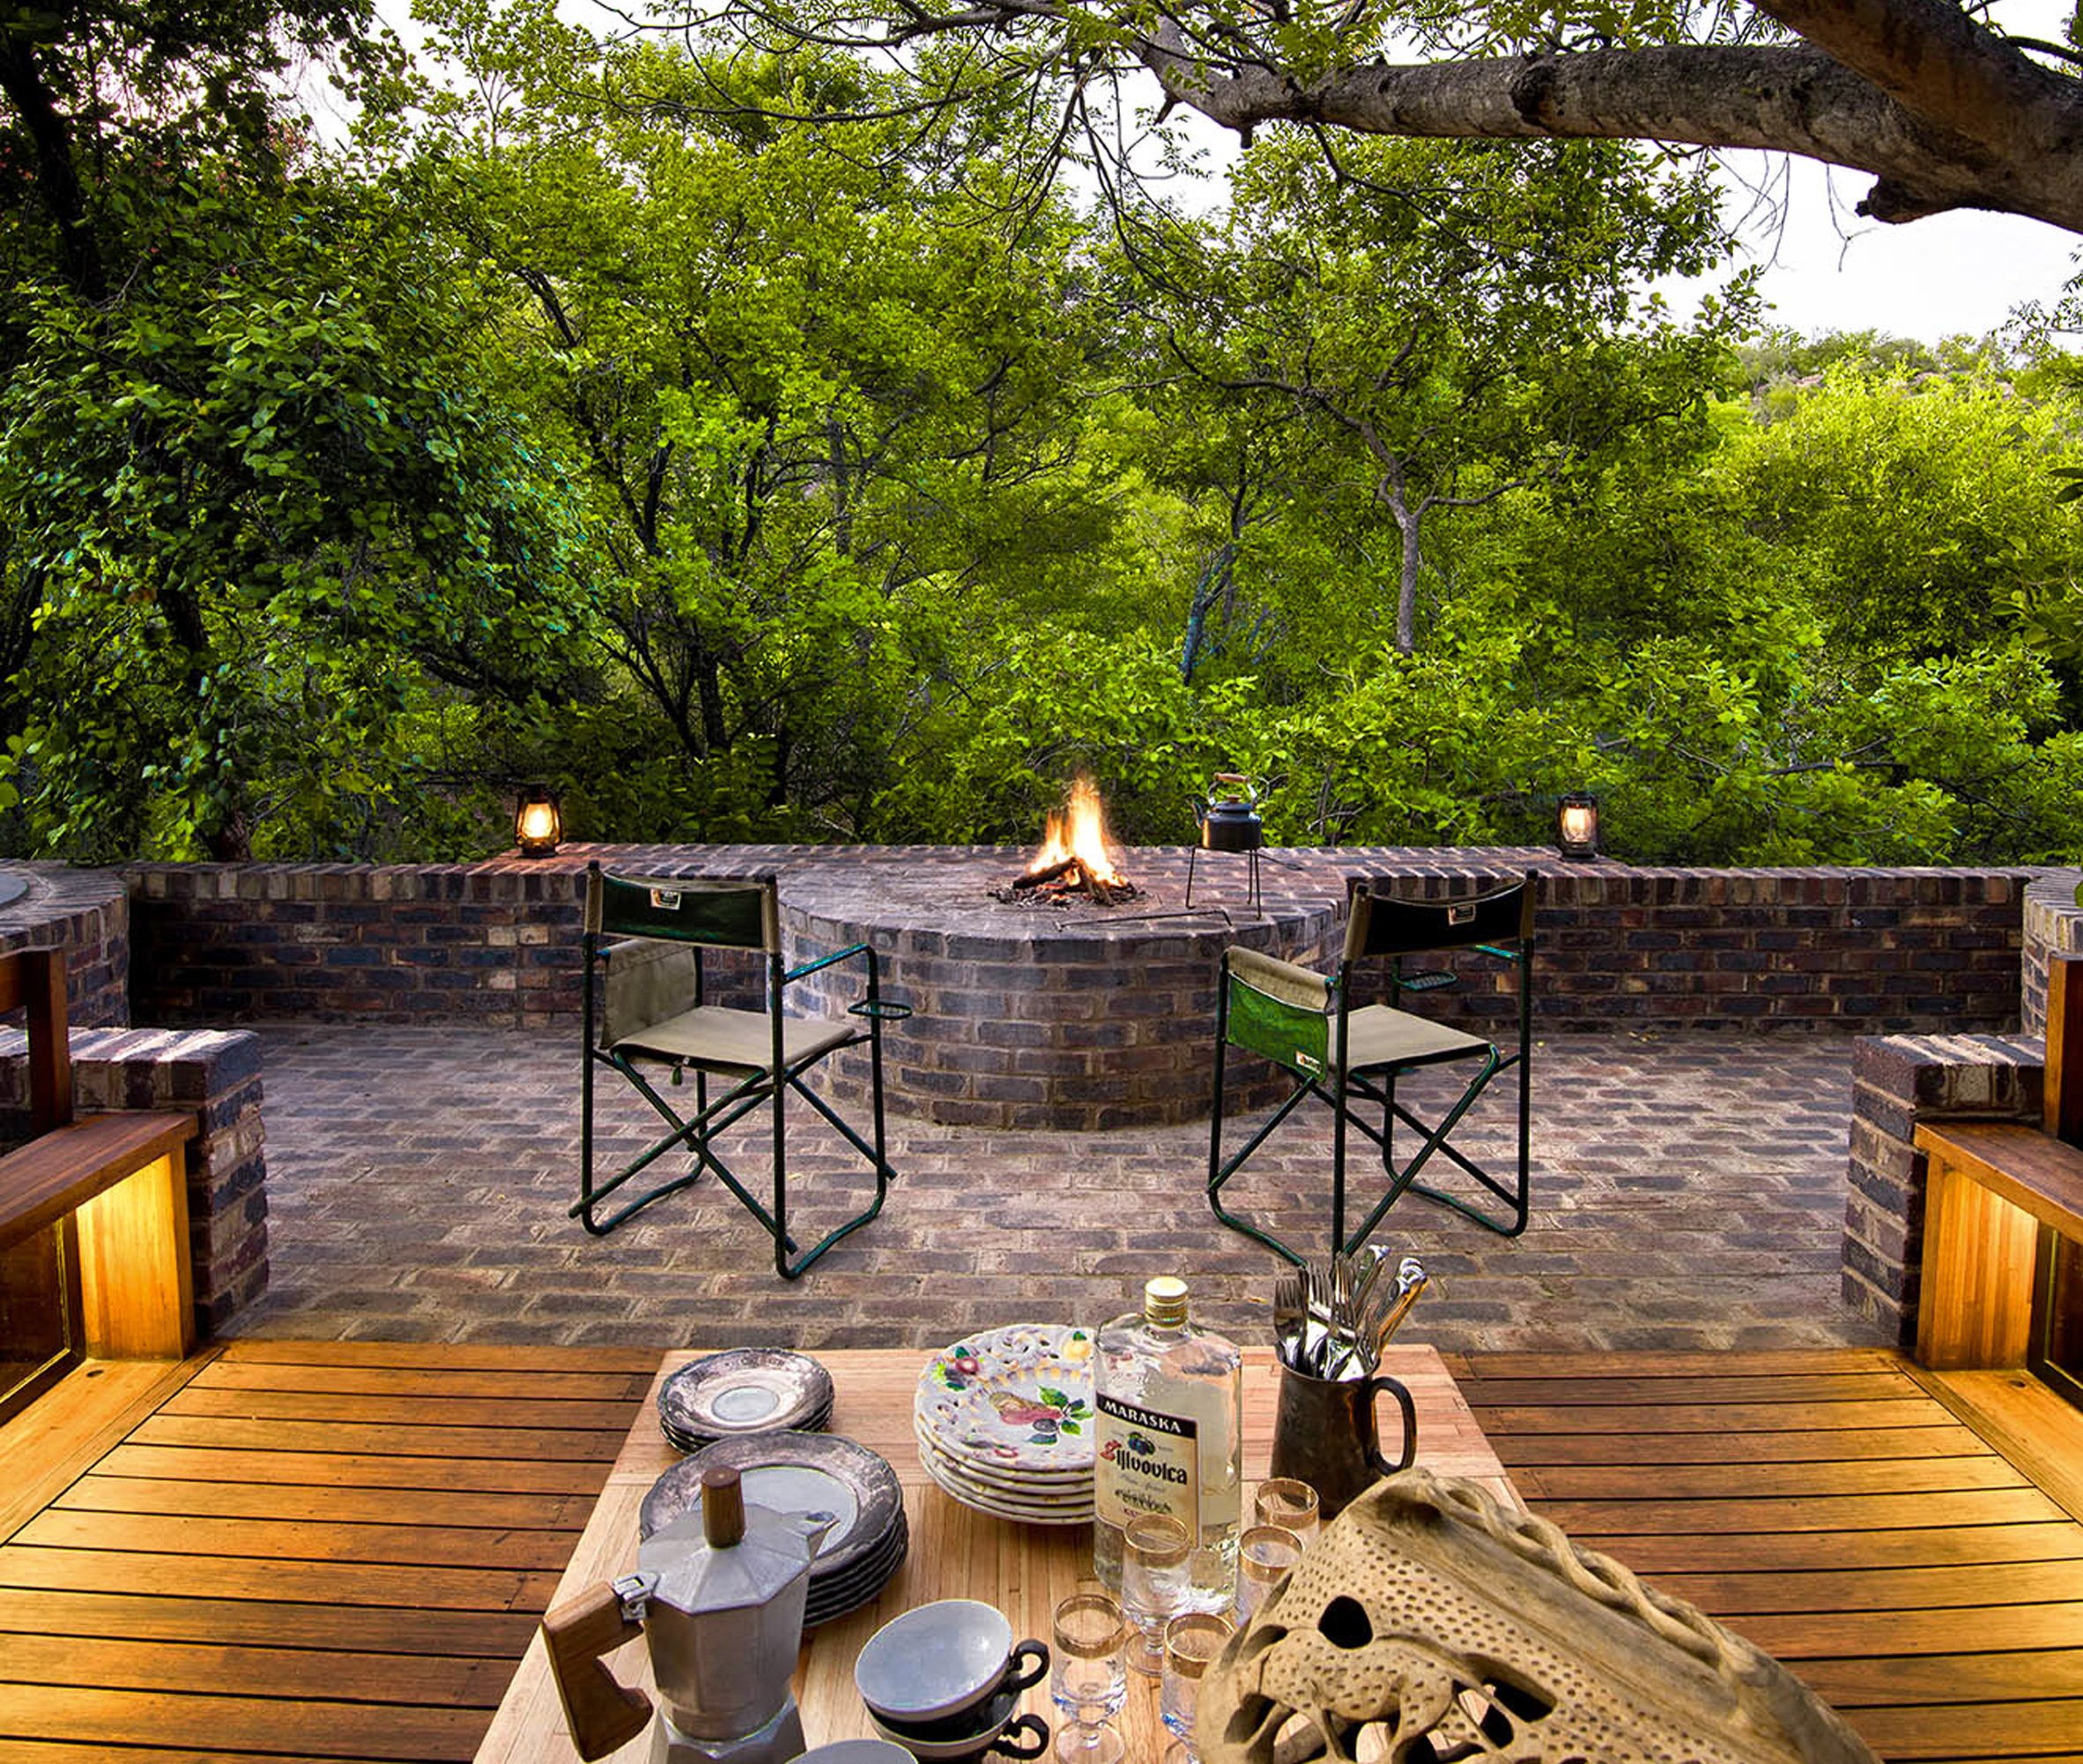 Outdoor fire place in jungle home